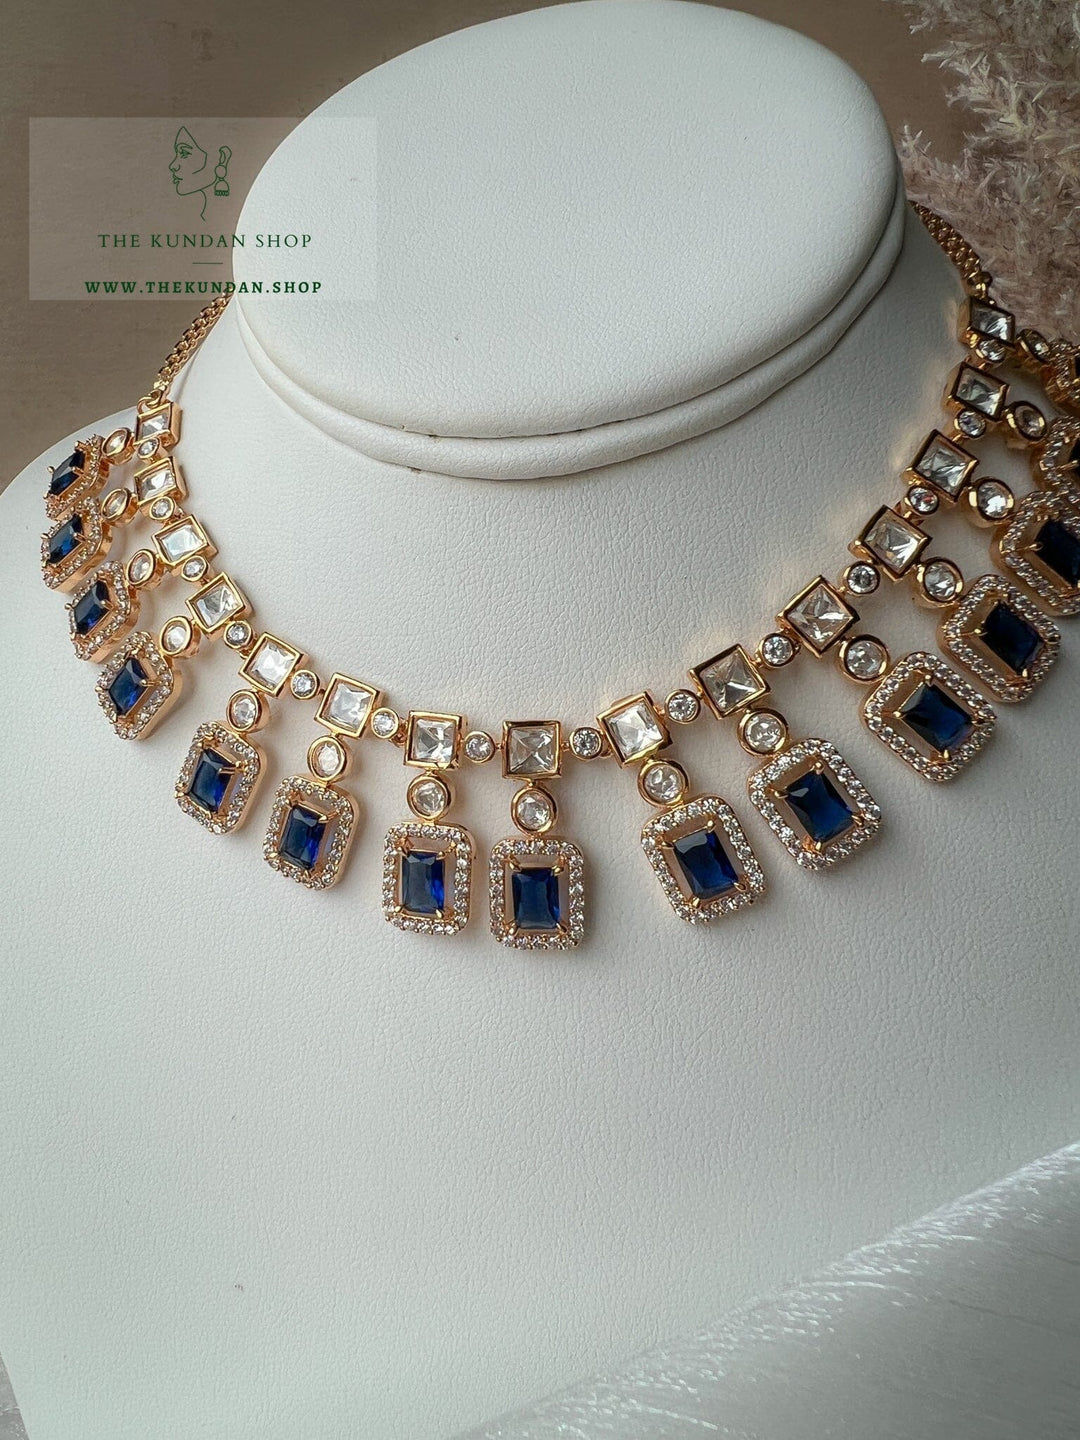 Rise in Midnight Blue Necklace Sets THE KUNDAN SHOP 